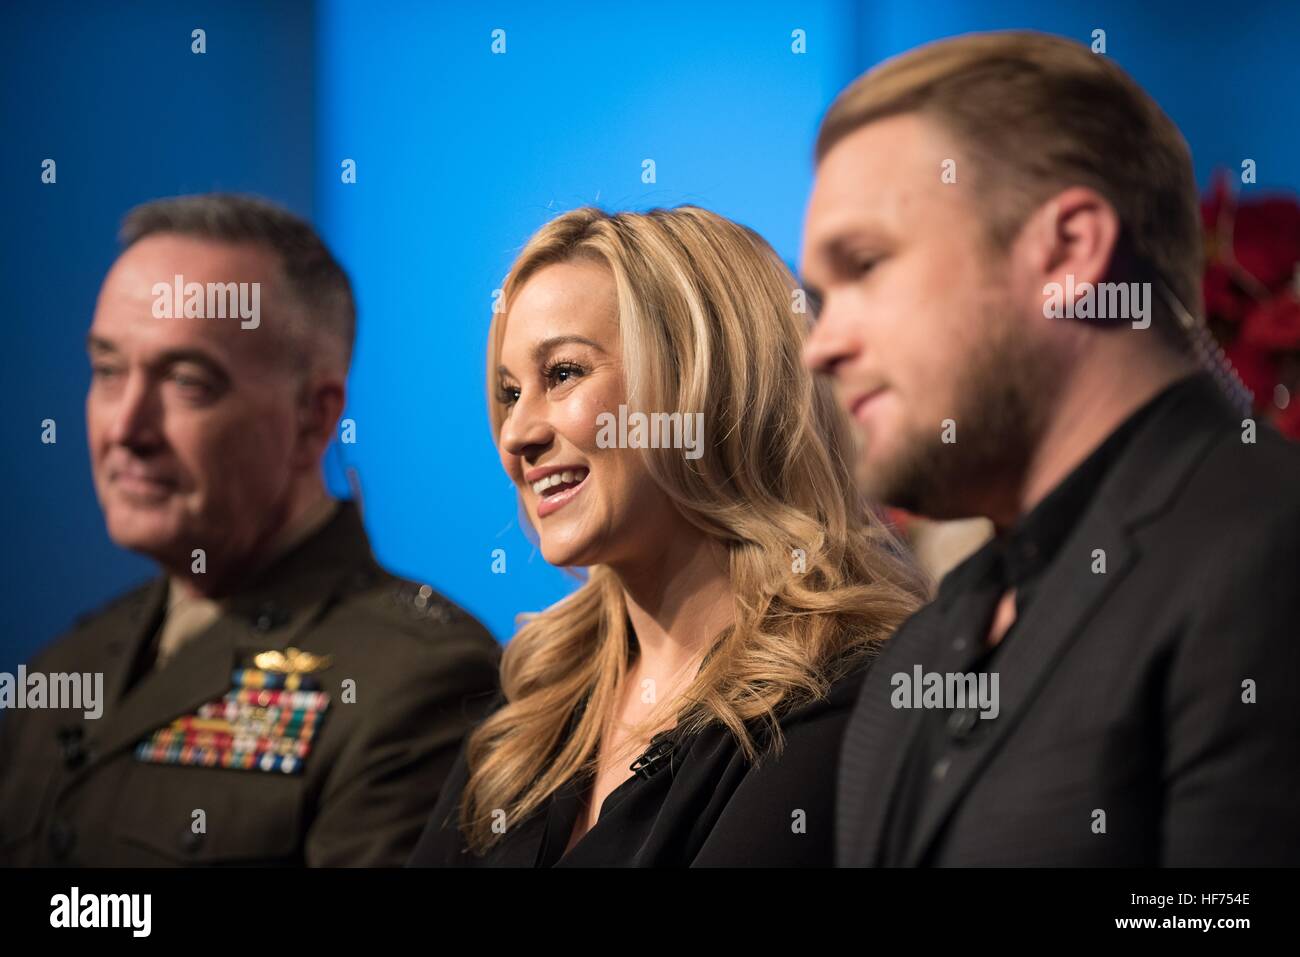 U.S. Joint Chiefs of Staff Chairman Joseph Dunford (left), country music singer Kellie Pickler, and husband country music songwriter Kyle Jacobs speak about their upcoming USO Tour to the Middle East to visit U.S. troops during television and radio interviews at the National Press Club December 23, 2016 in Washington, DC. Stock Photo